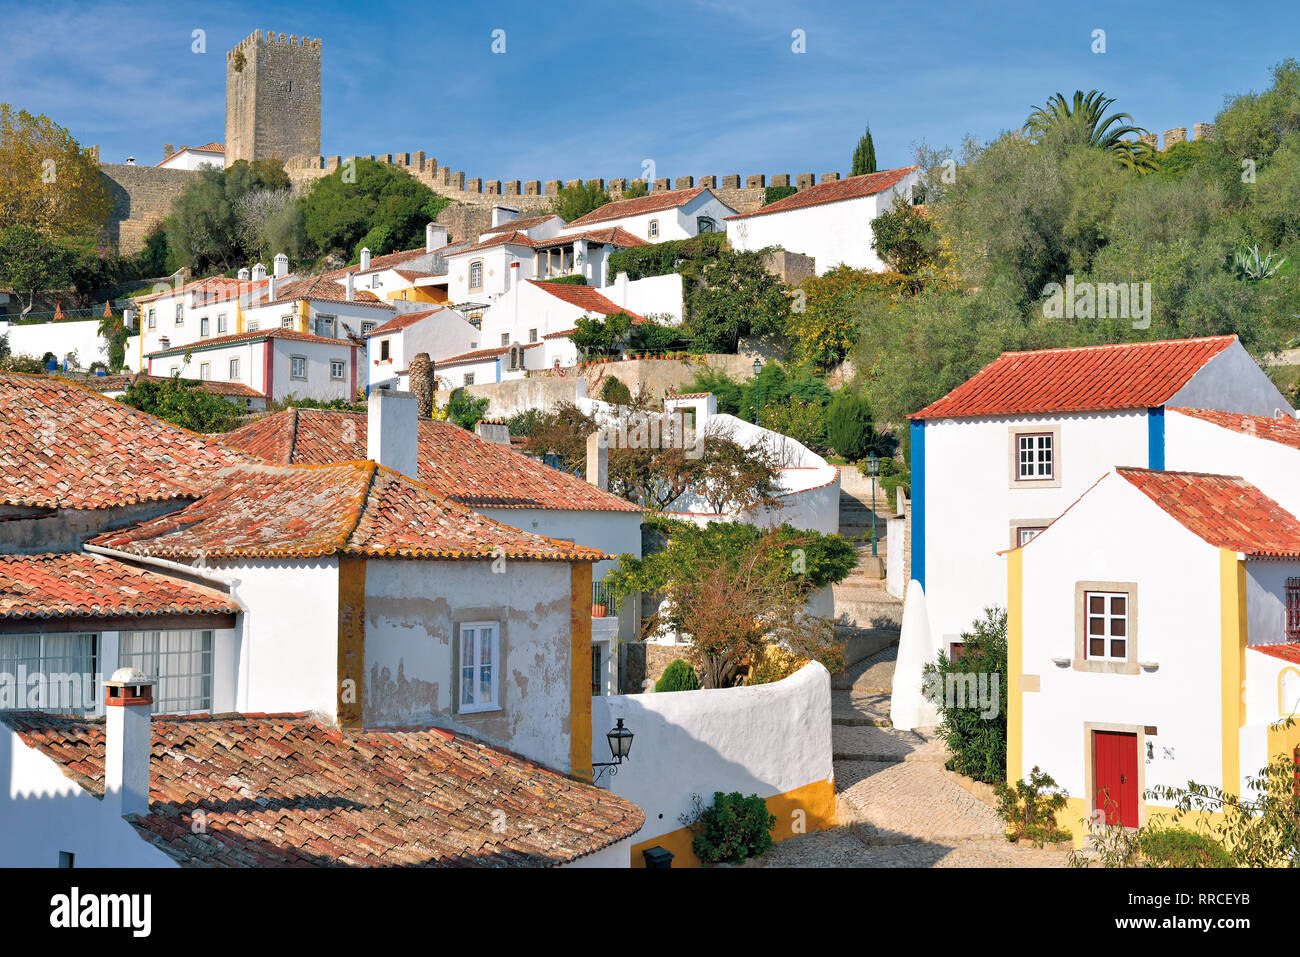 Charming medieval village with  white washed houses and castle on top Stock Photo